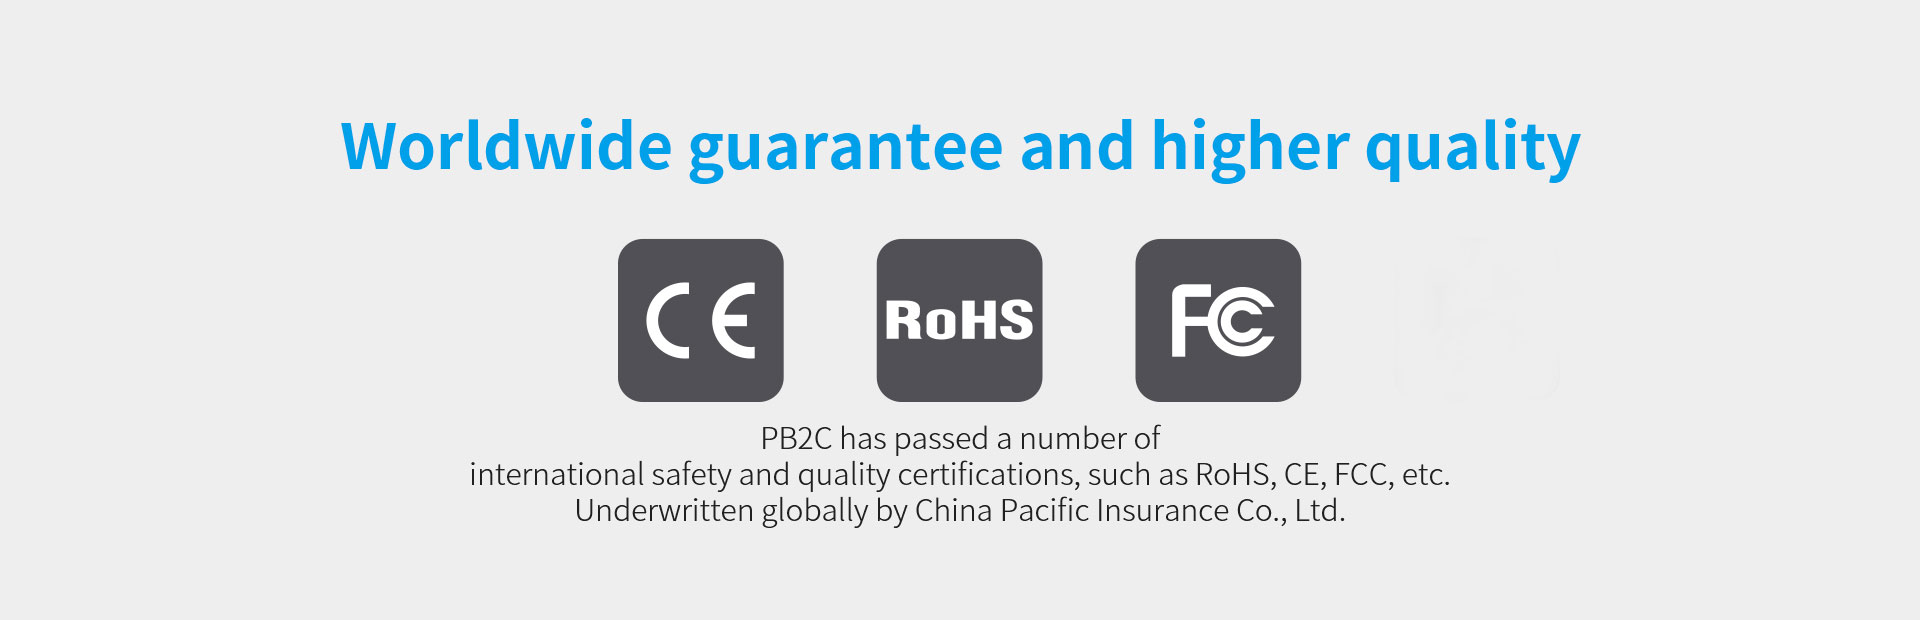 Worldwide guarantee, passed quality certifications.